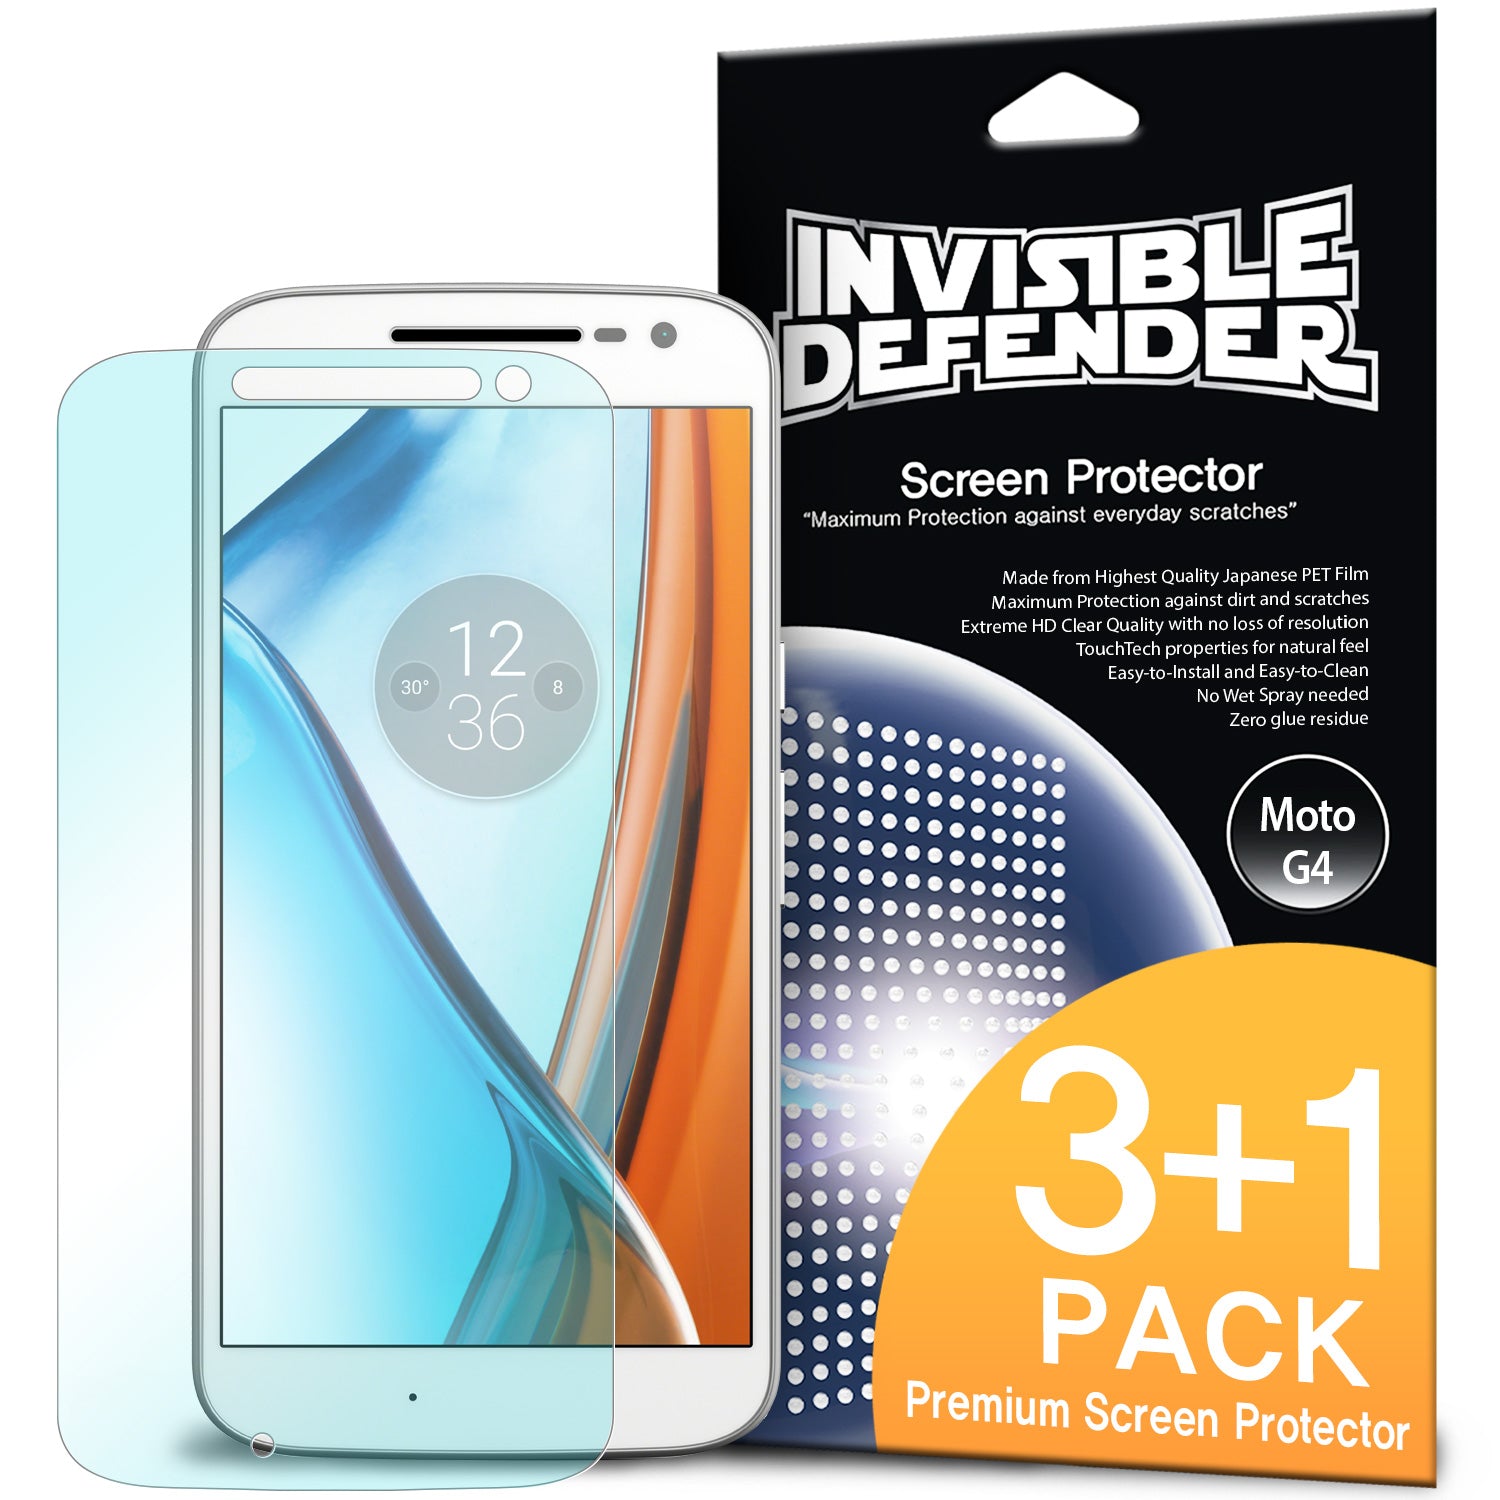 ringke invisible defender film screen protector for moto g4